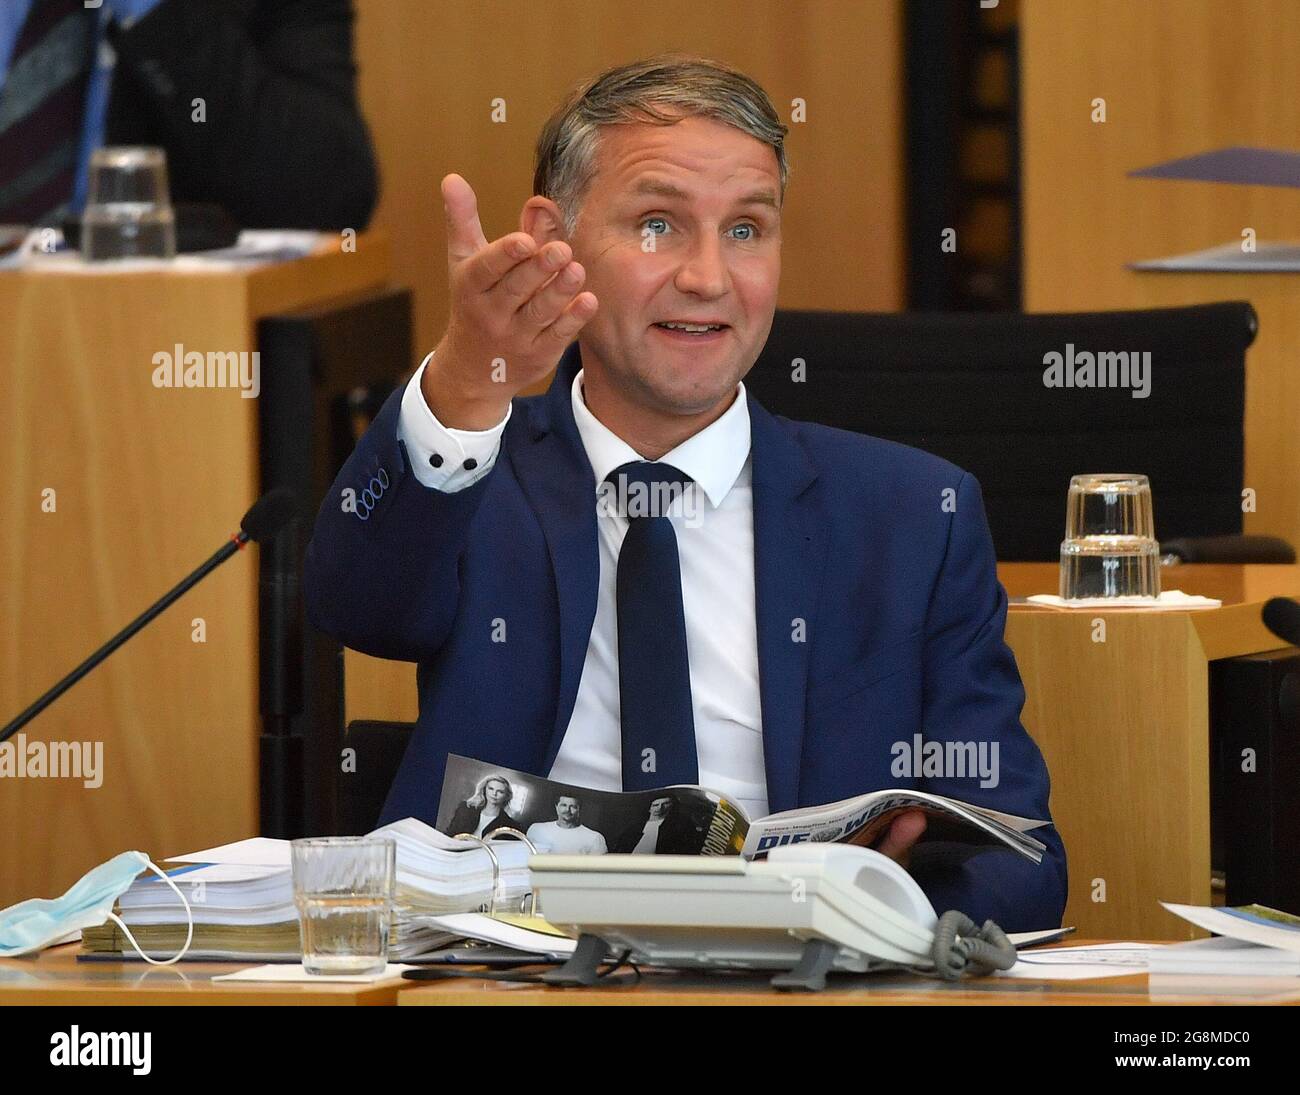 Erfurt, Germany. 21st July, 2021. Björn Höcke, AfD parliamentary group leader, sits in the plenary chamber of the Thuringian state parliament and gestures. The Thuringian state parliament is to decide on the vote of no confidence in Thuringia's prime minister initiated by the AfD on July 23. The item was put on the agenda of the plenary session without any objection from the deputies. The AfD has nominated its parliamentary group leader Björn Höcke as an opposing candidate to the current prime minister. Credit: Martin Schutt/dpa-Zentralbild/dpa/Alamy Live News Stock Photo